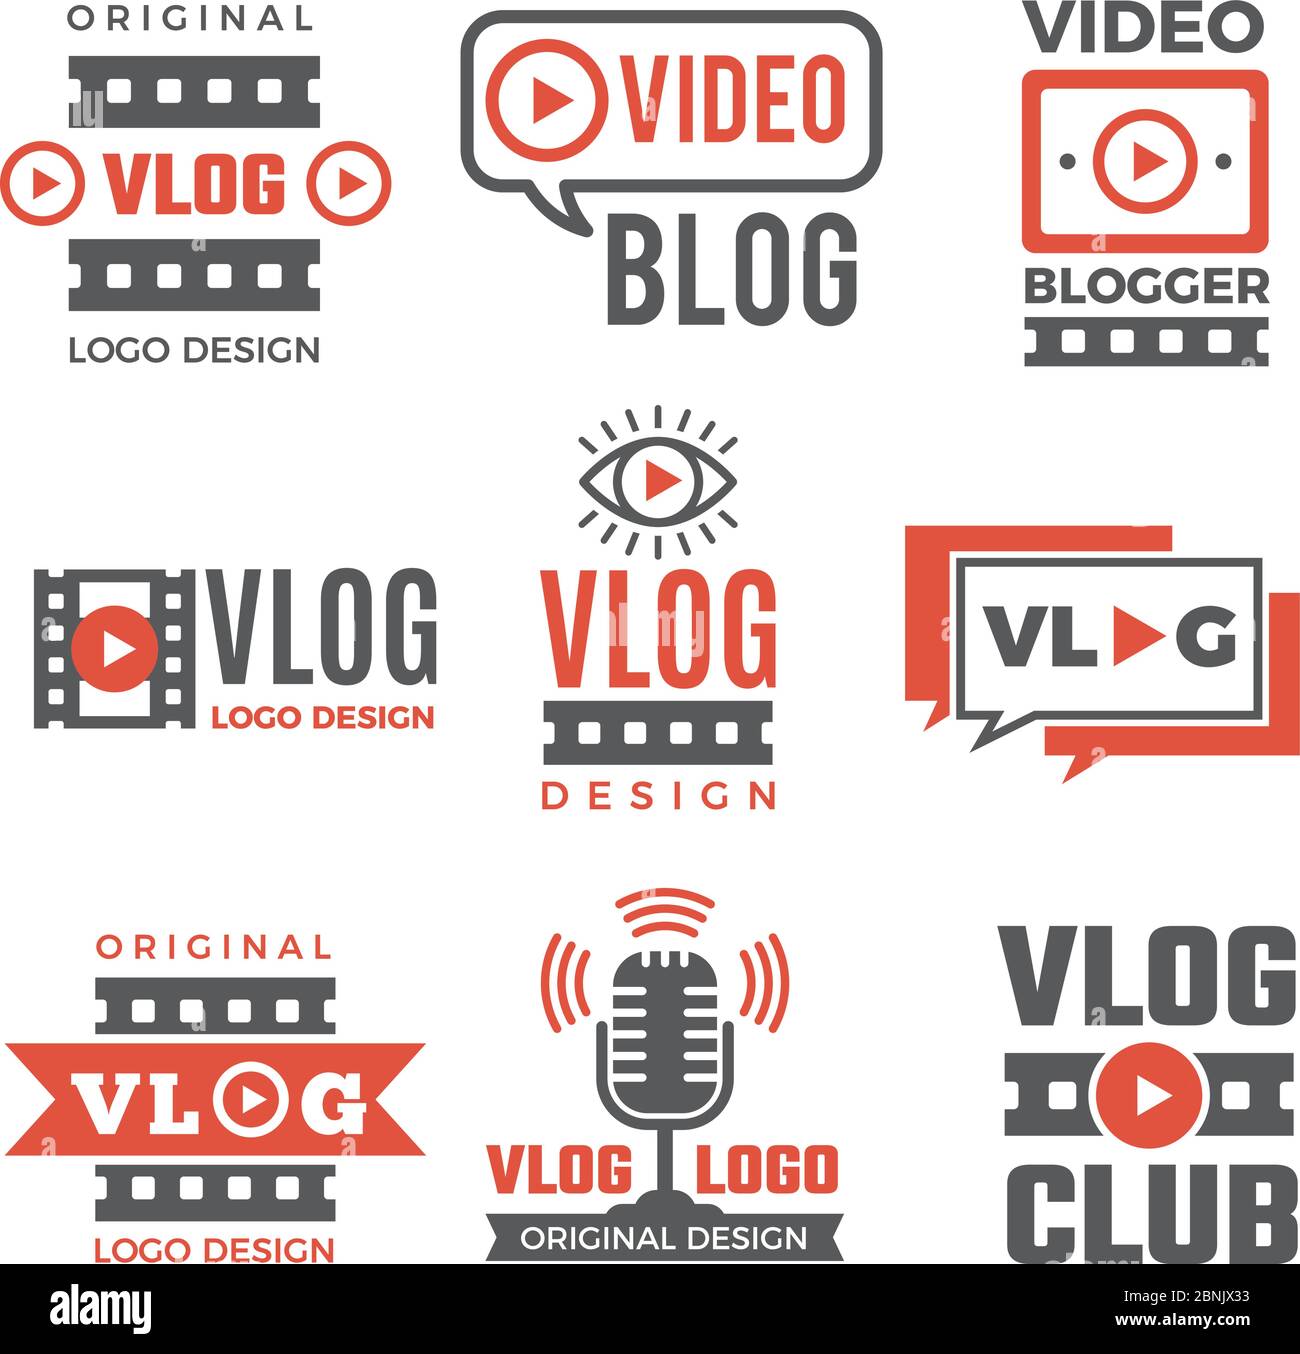 Set of logotypes for video bloggers Stock Vector